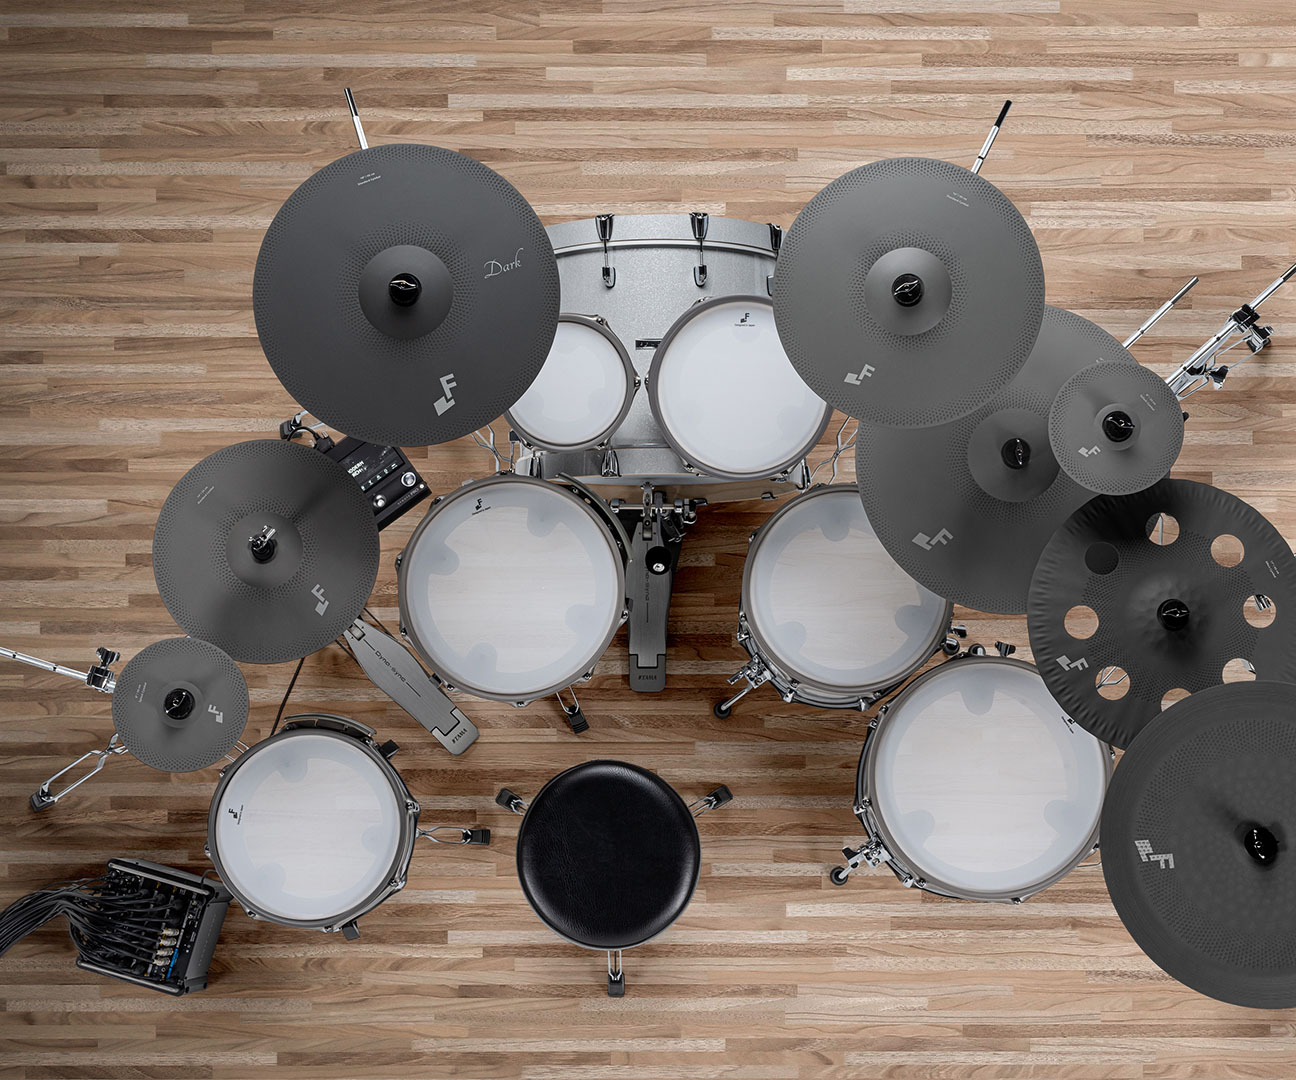 Electronic Drums EFNOTE PRO